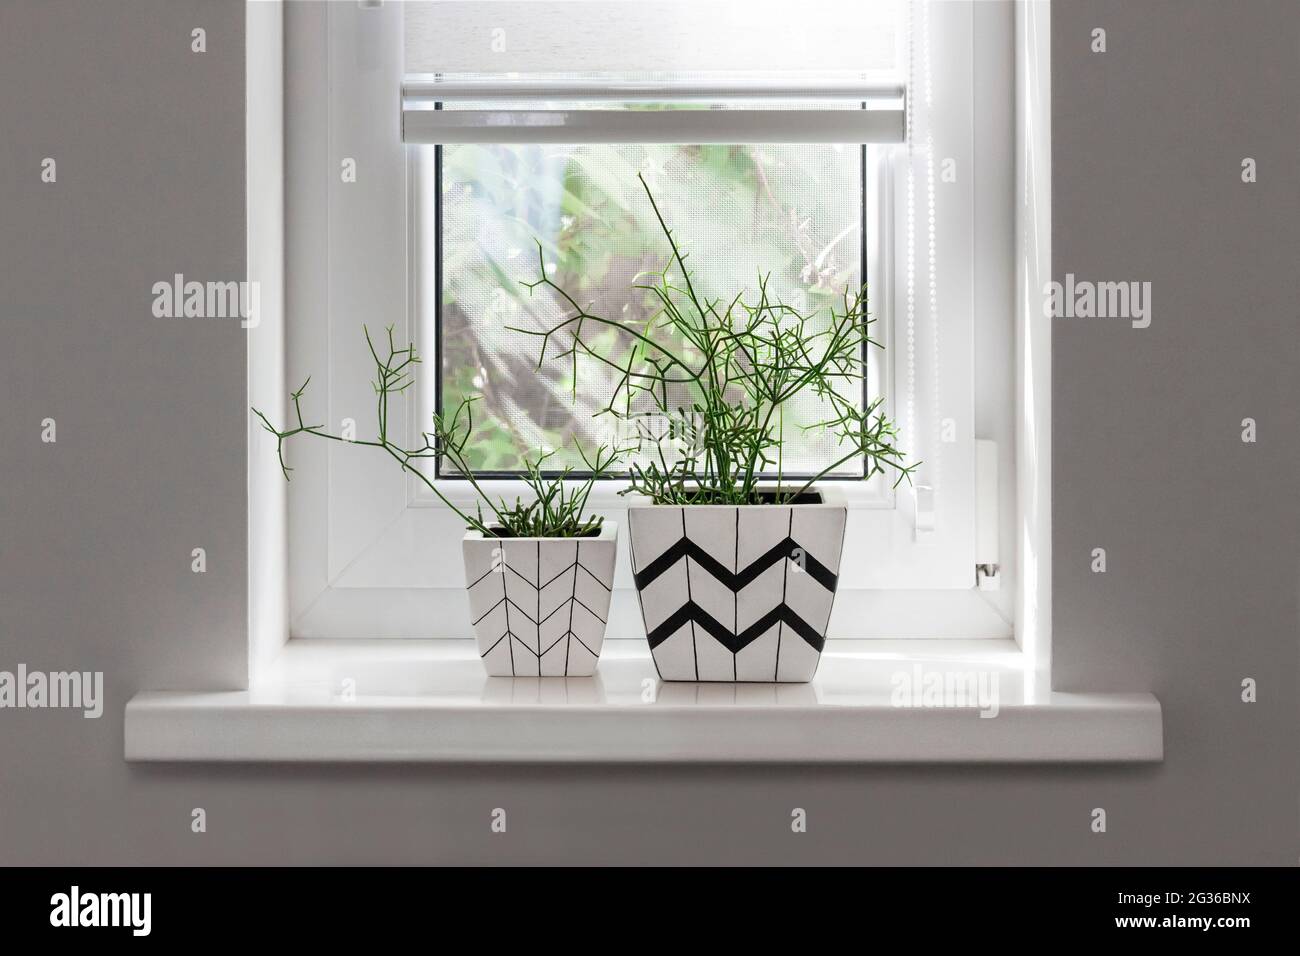 Two white square flower pots with geometric patterns with rhipsalis plants planted in them stand on windowsill with partially raised roller blind Stock Photo